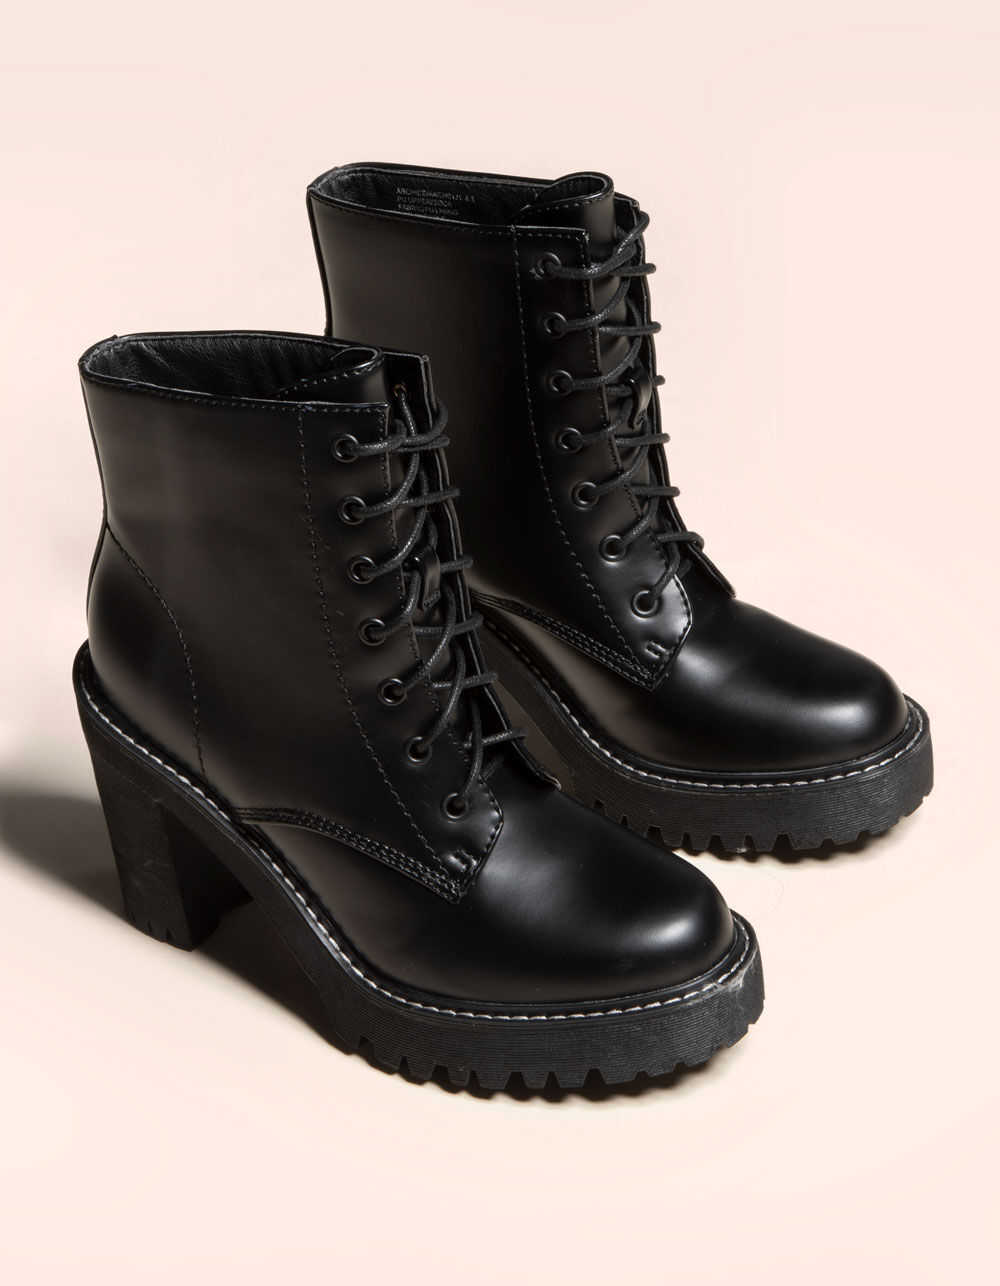 MADDEN GIRL Lace Up Lug Boot